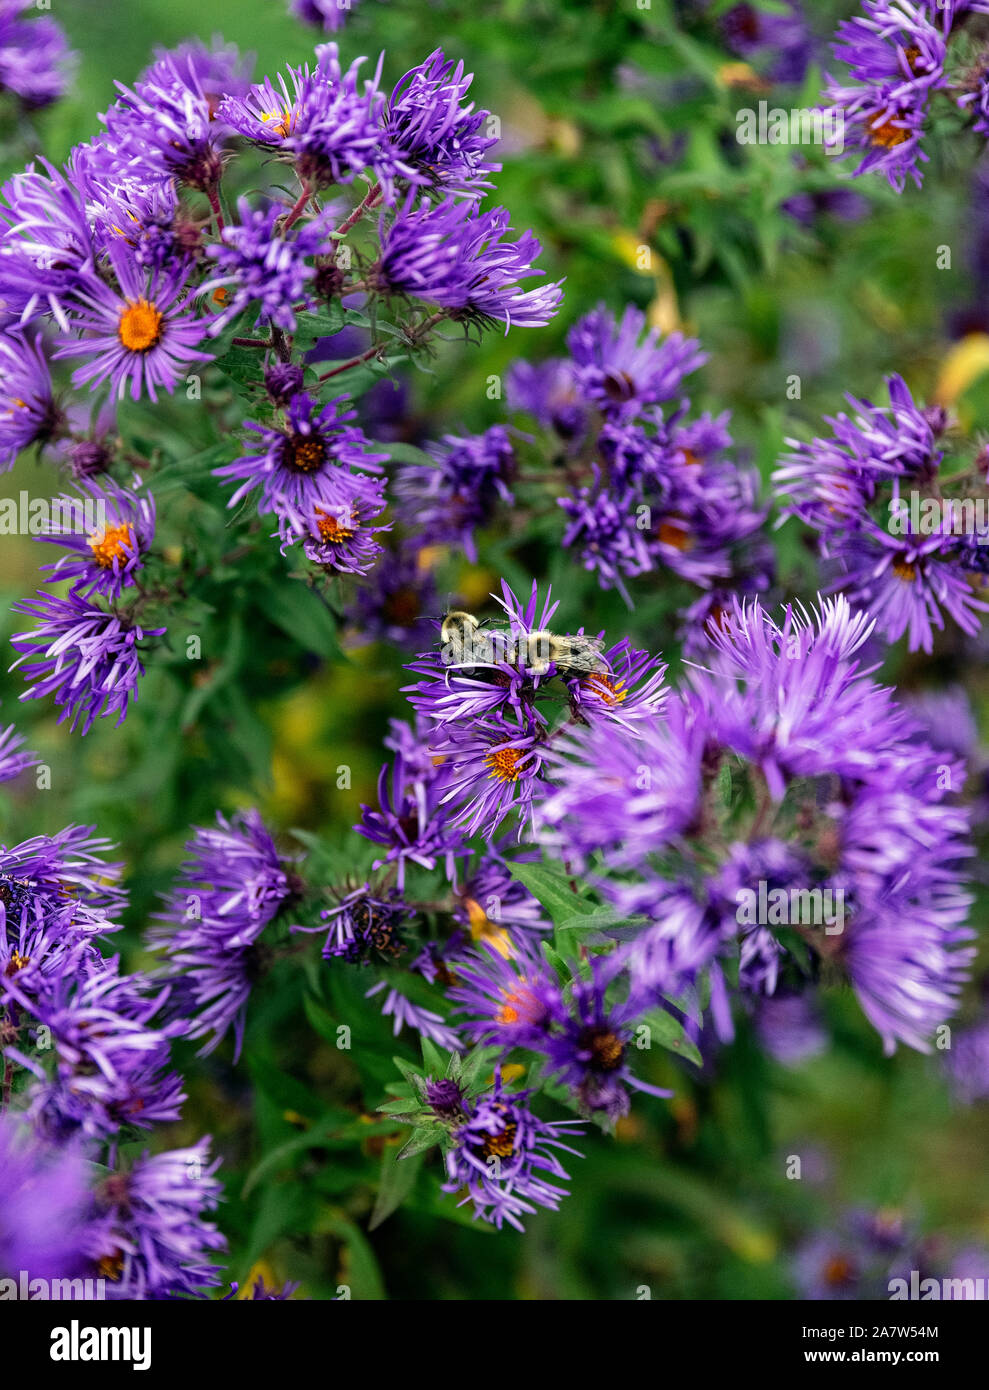 Purple astors and bumble bees. Stock Photo